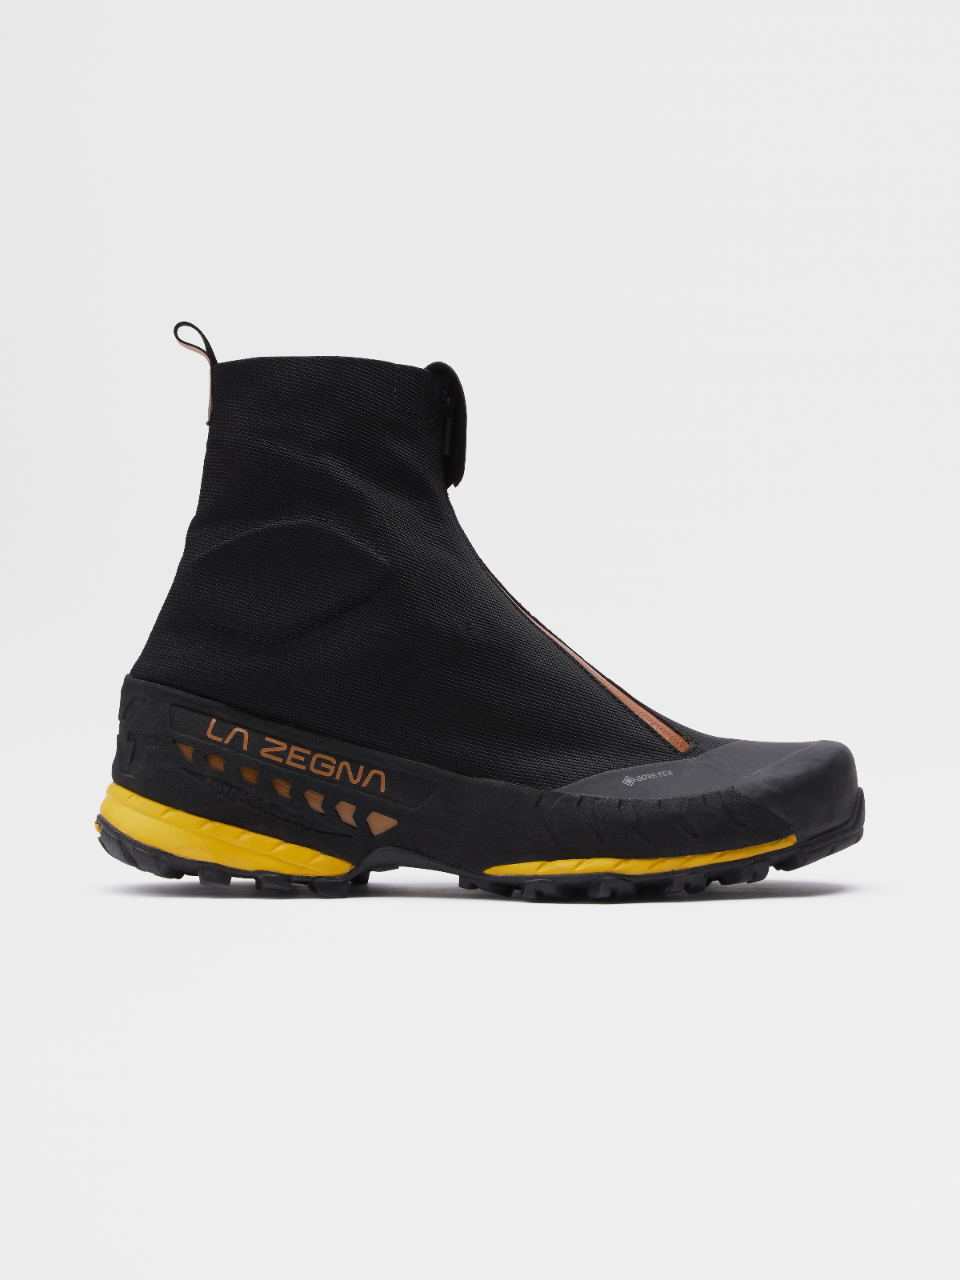 Zegna with La Sportiva Tx Top Mountain Boots